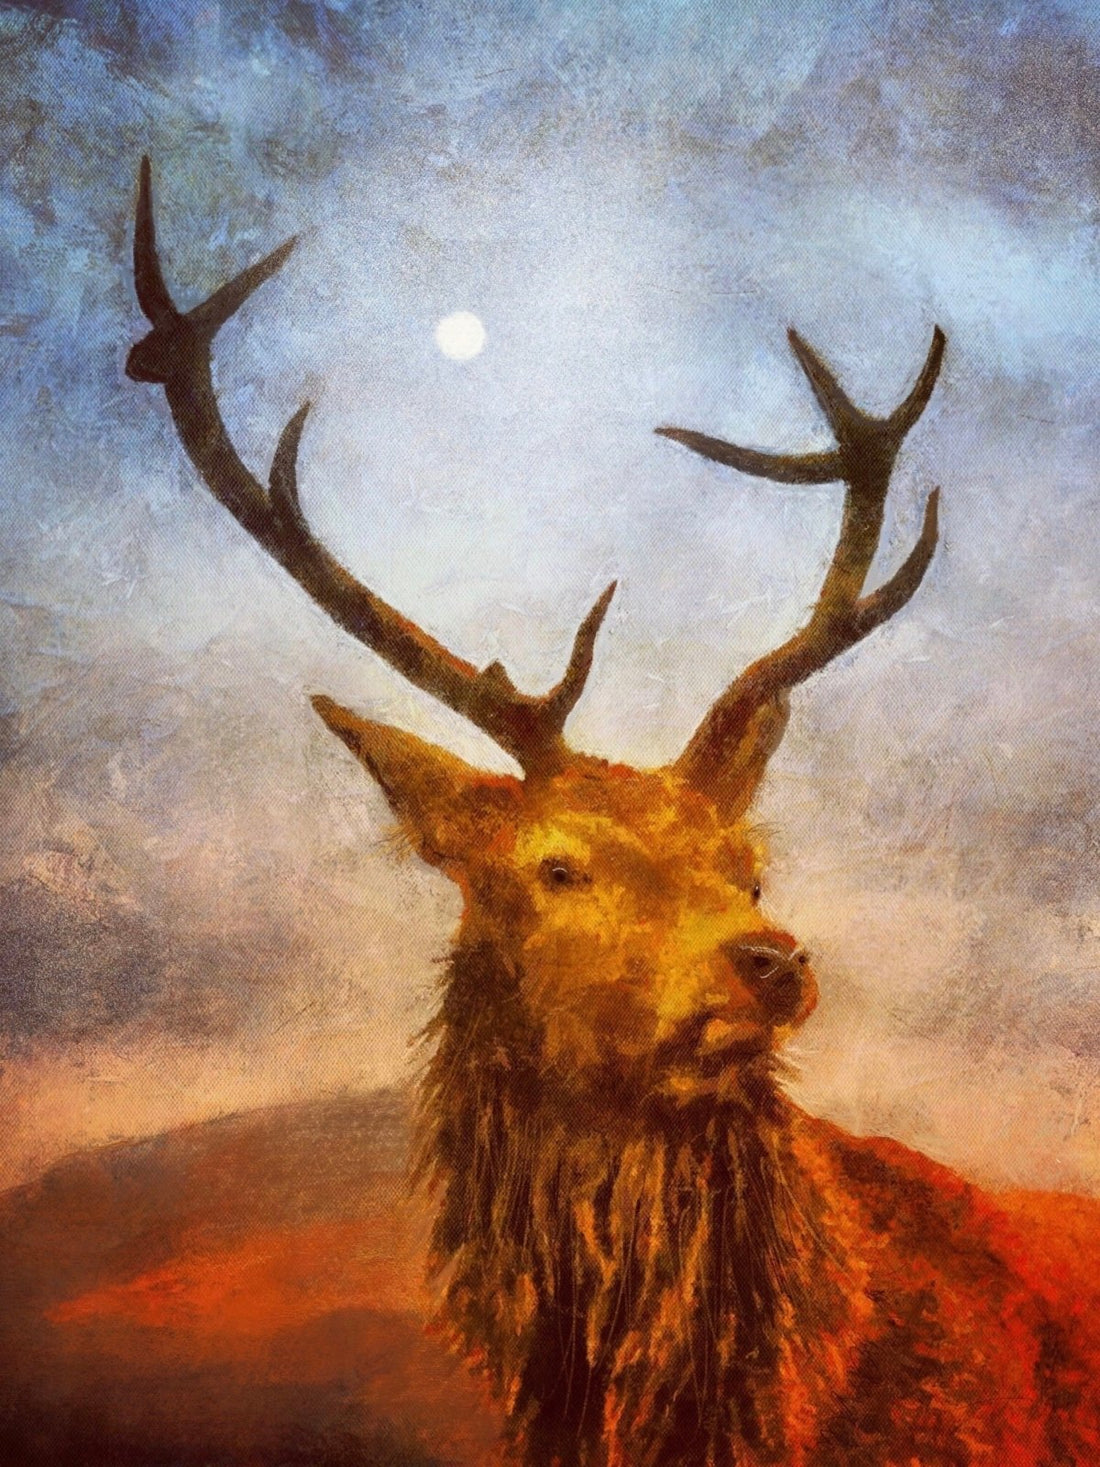 A Moonlit Highland Stag Painting Fine Art Prints | An Artwork from Scotland by Scottish Artist Hunter